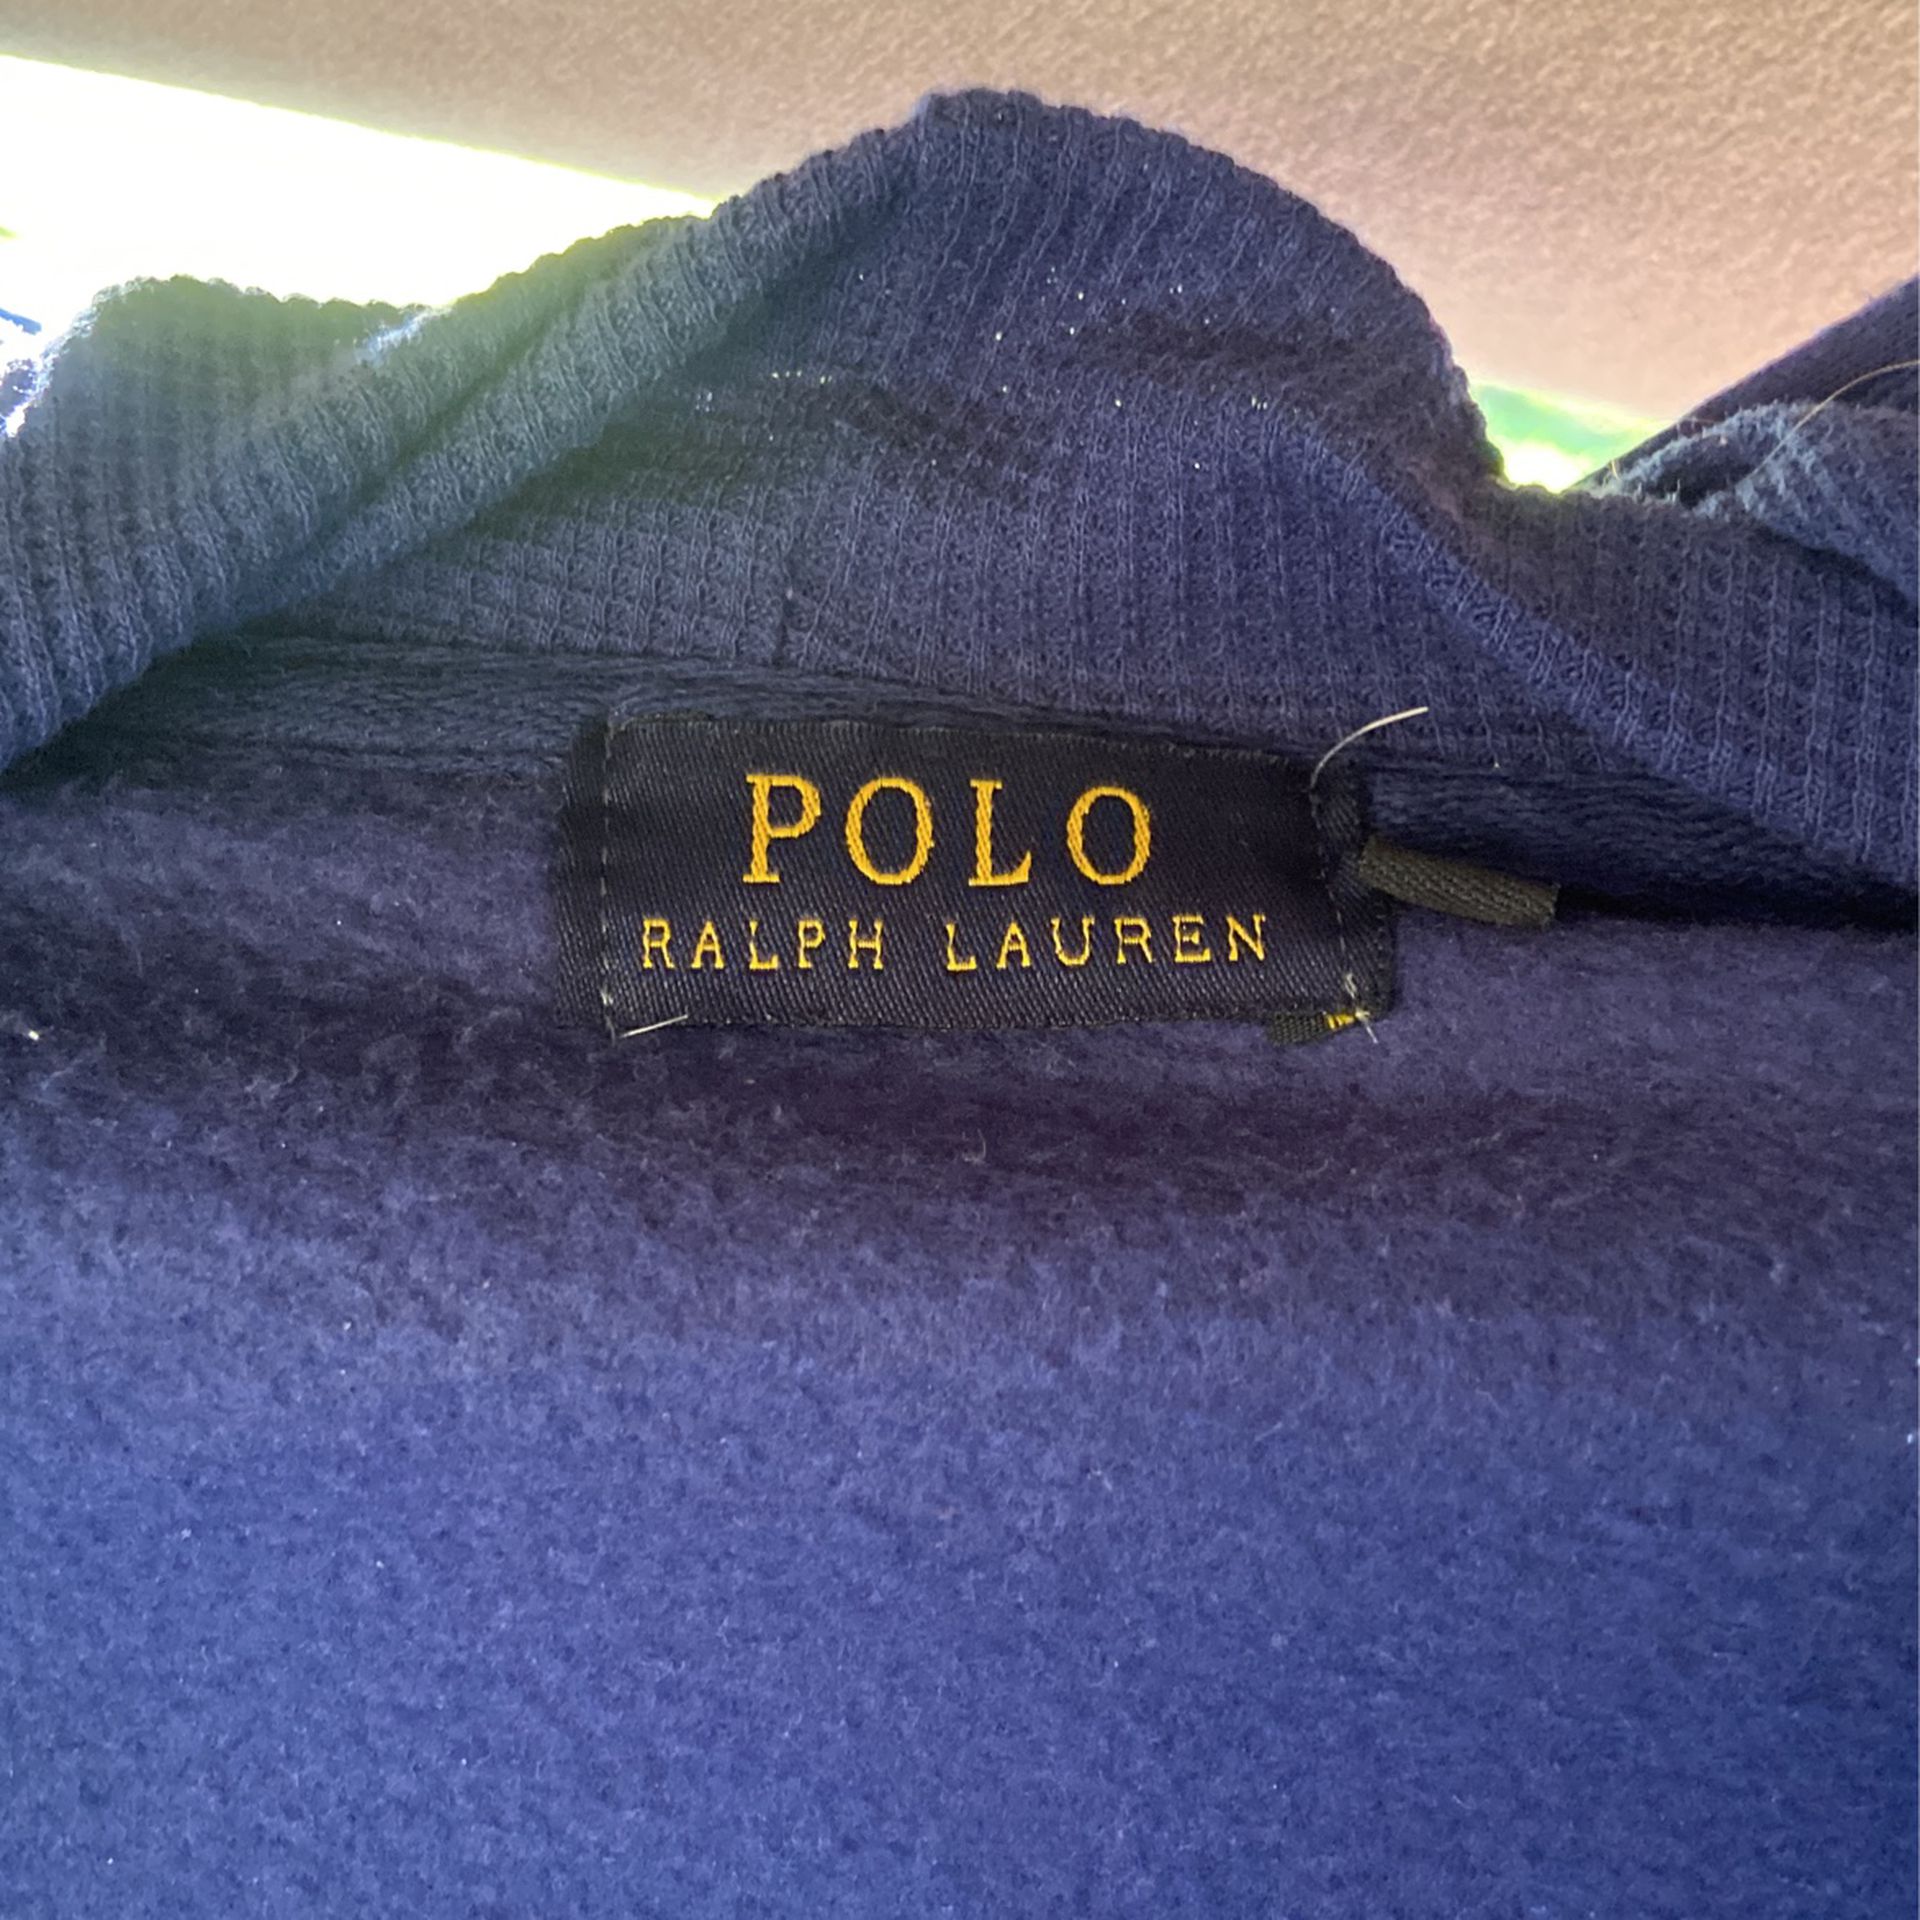 Blue Polo Hoodie/jacket Pictures Aren’t The Best But Took In Car 